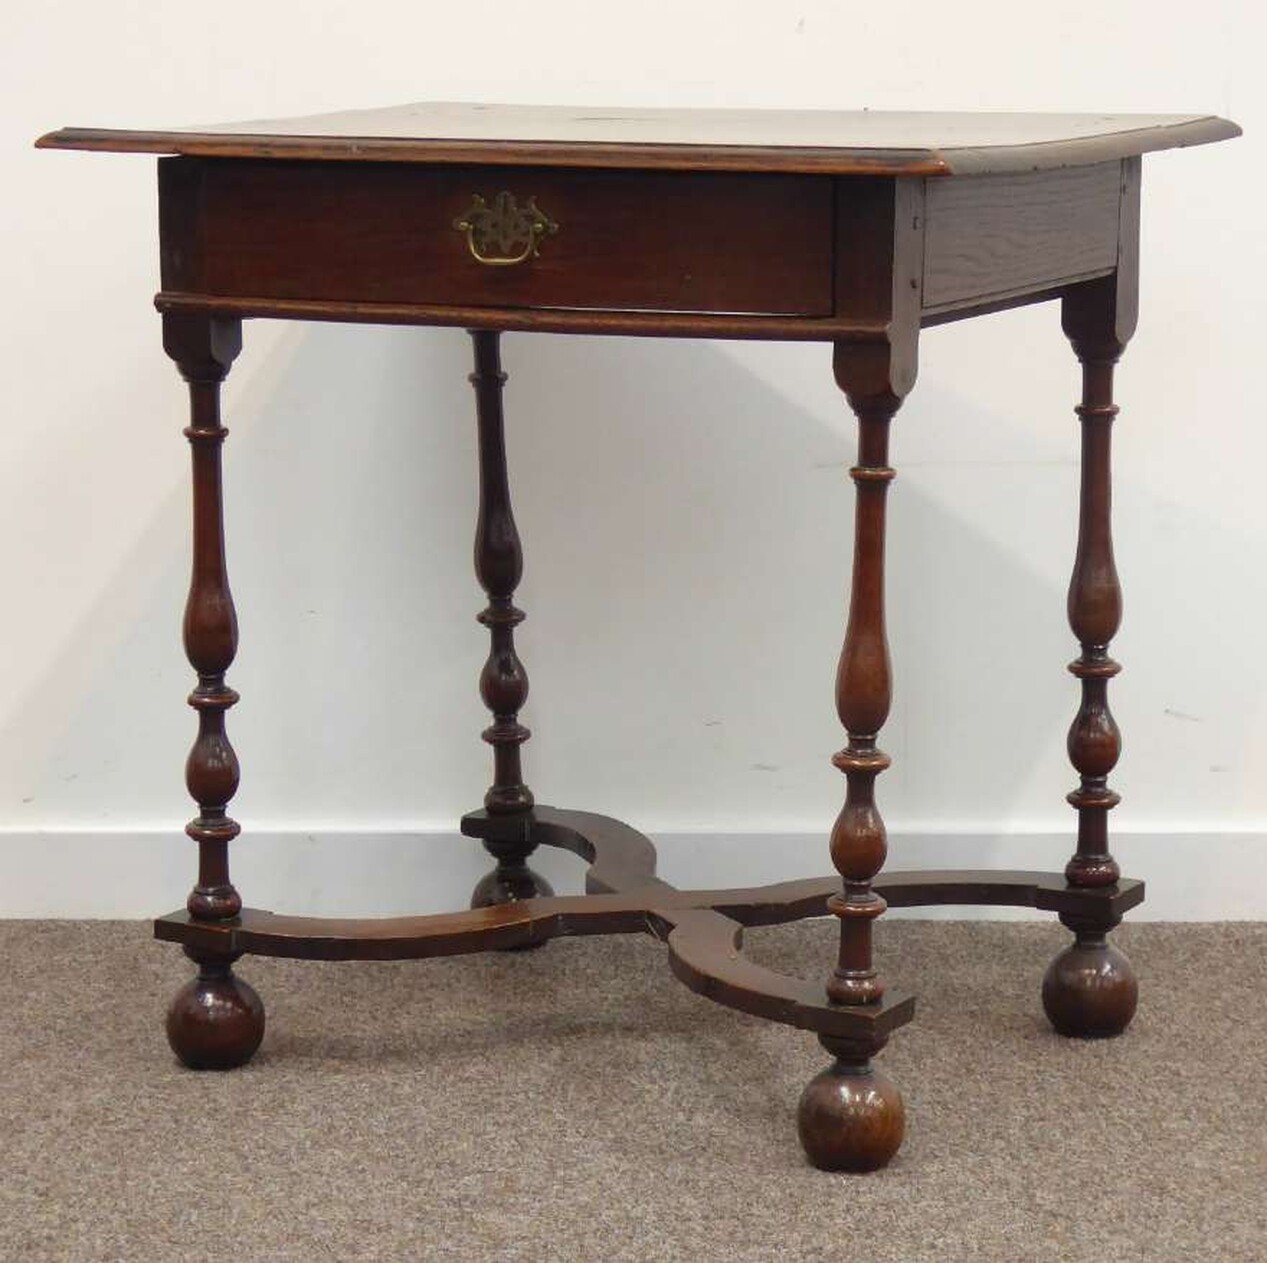 Antique Tables, Cupboards, Dressers at David Swanson Antiques